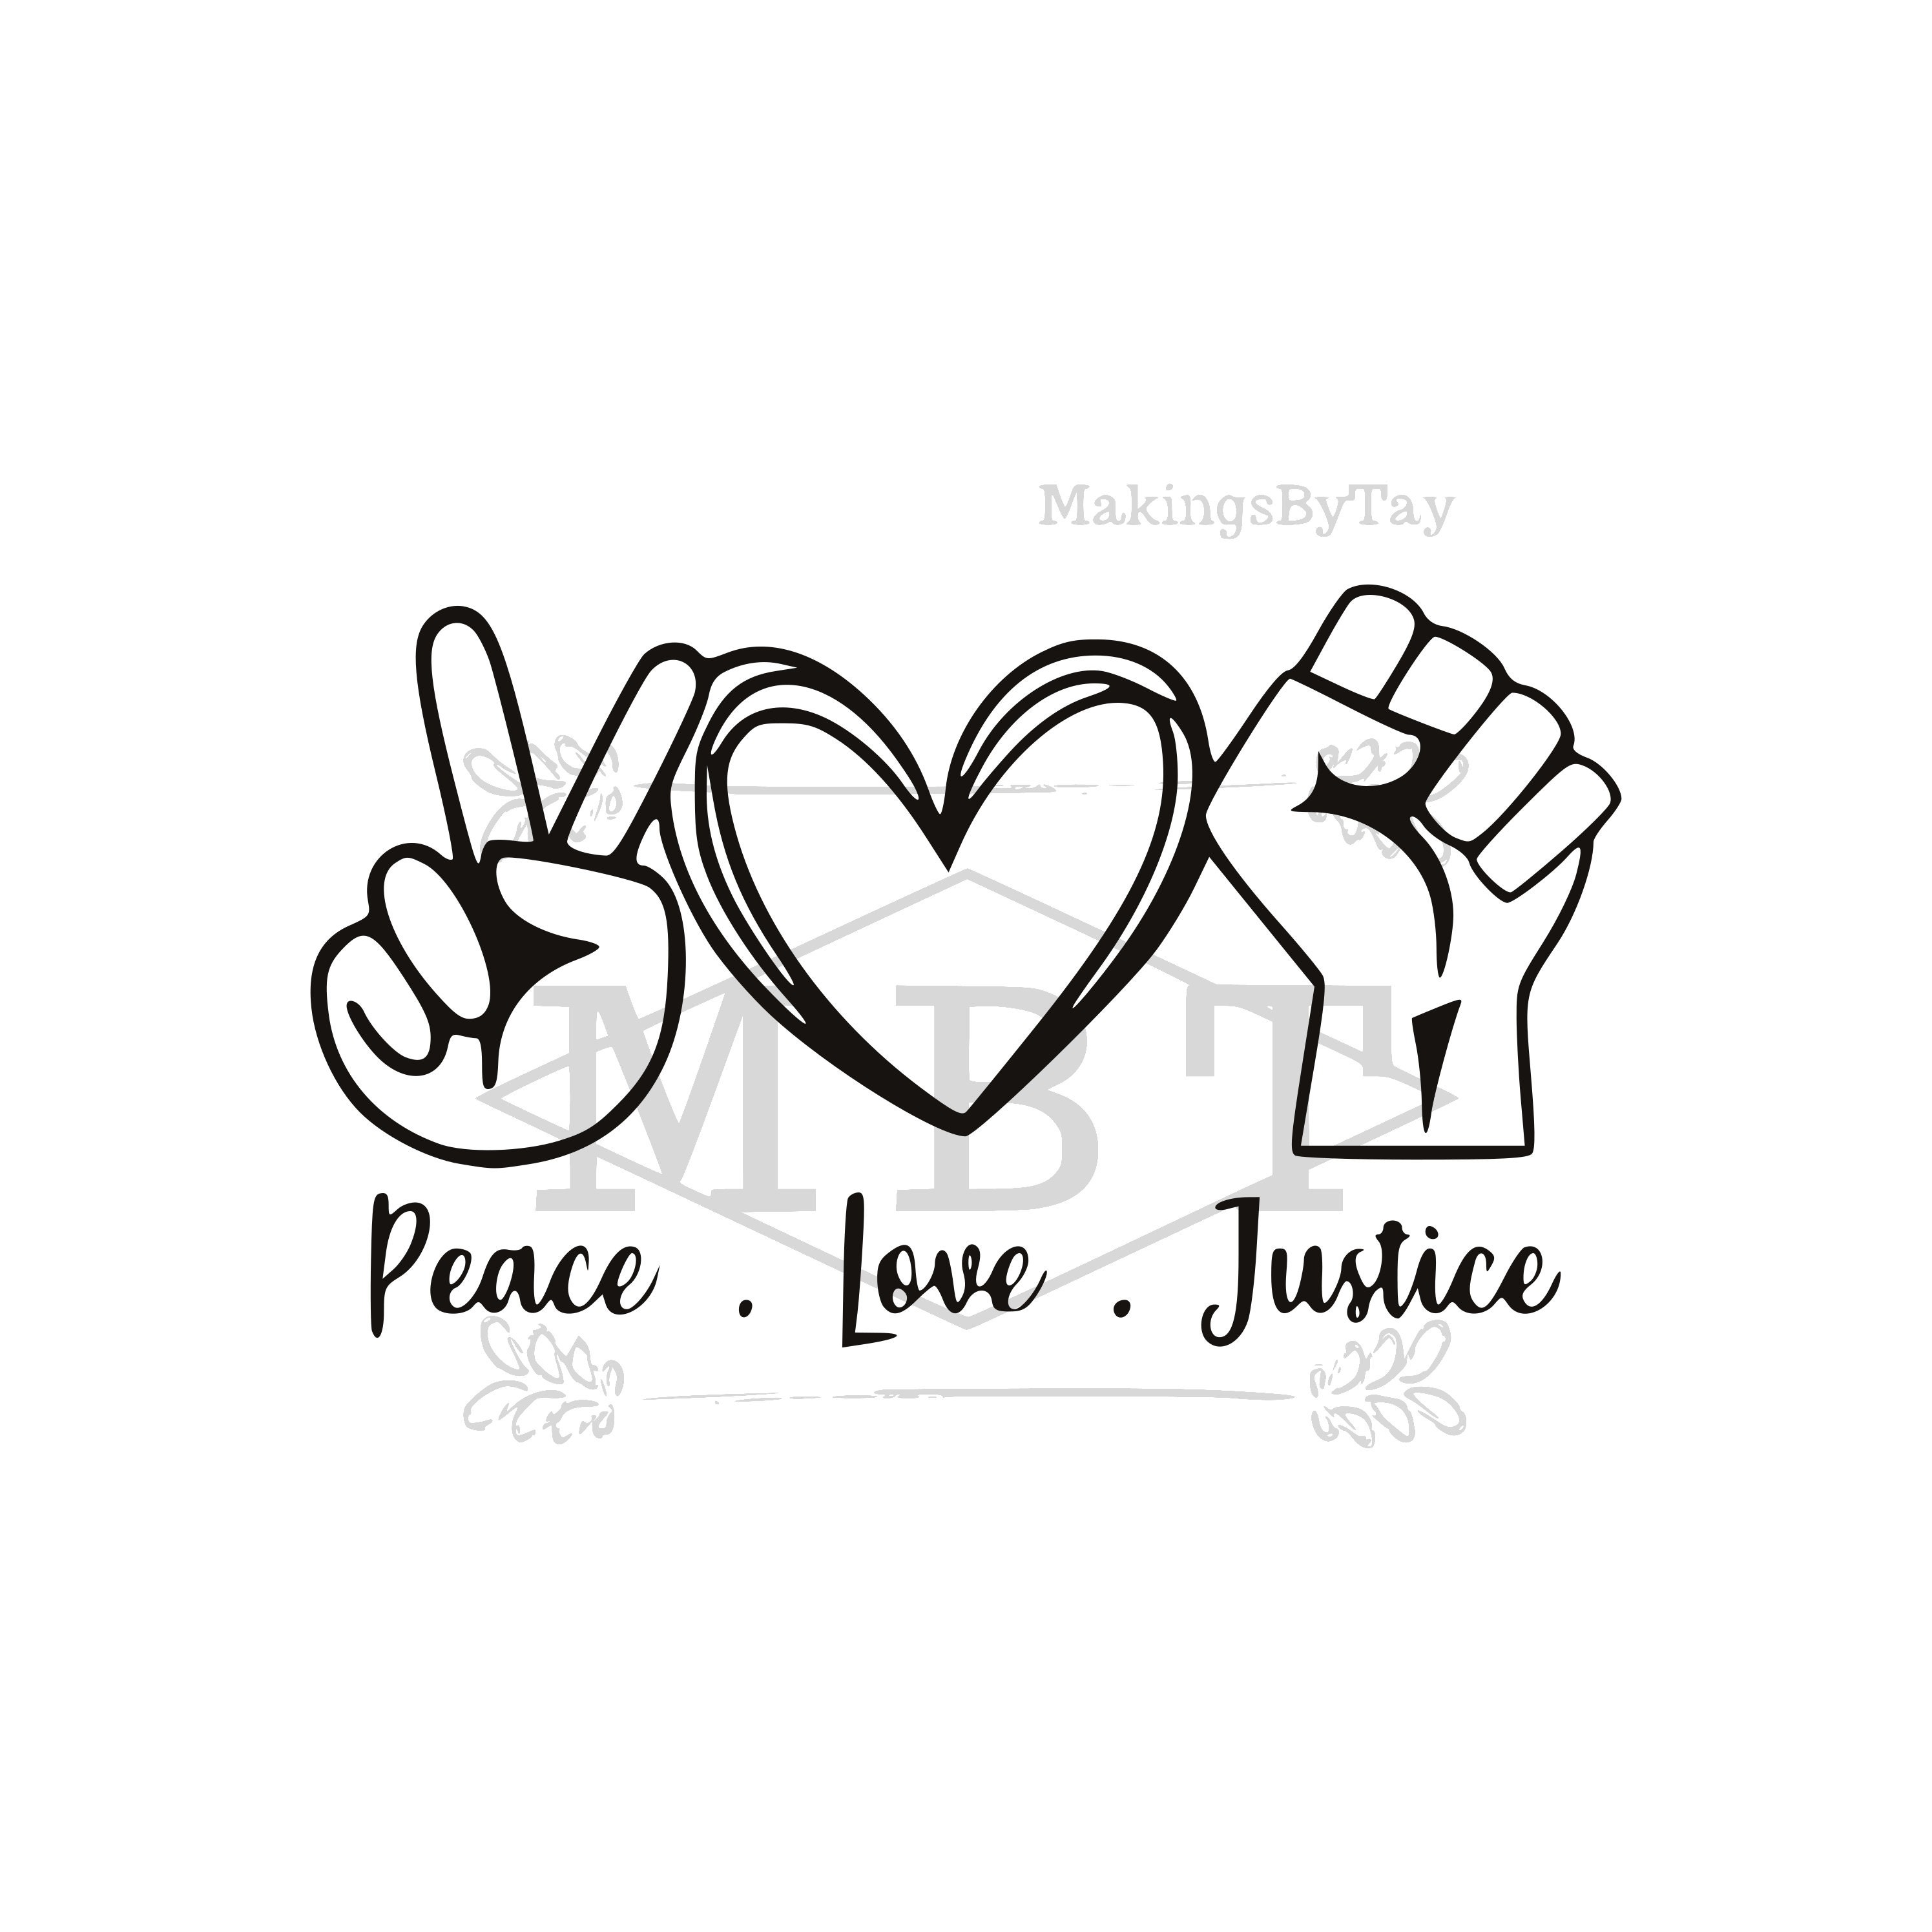 Instant Download Peace Love Justice Blm Black Lives Heart Hand Etsy